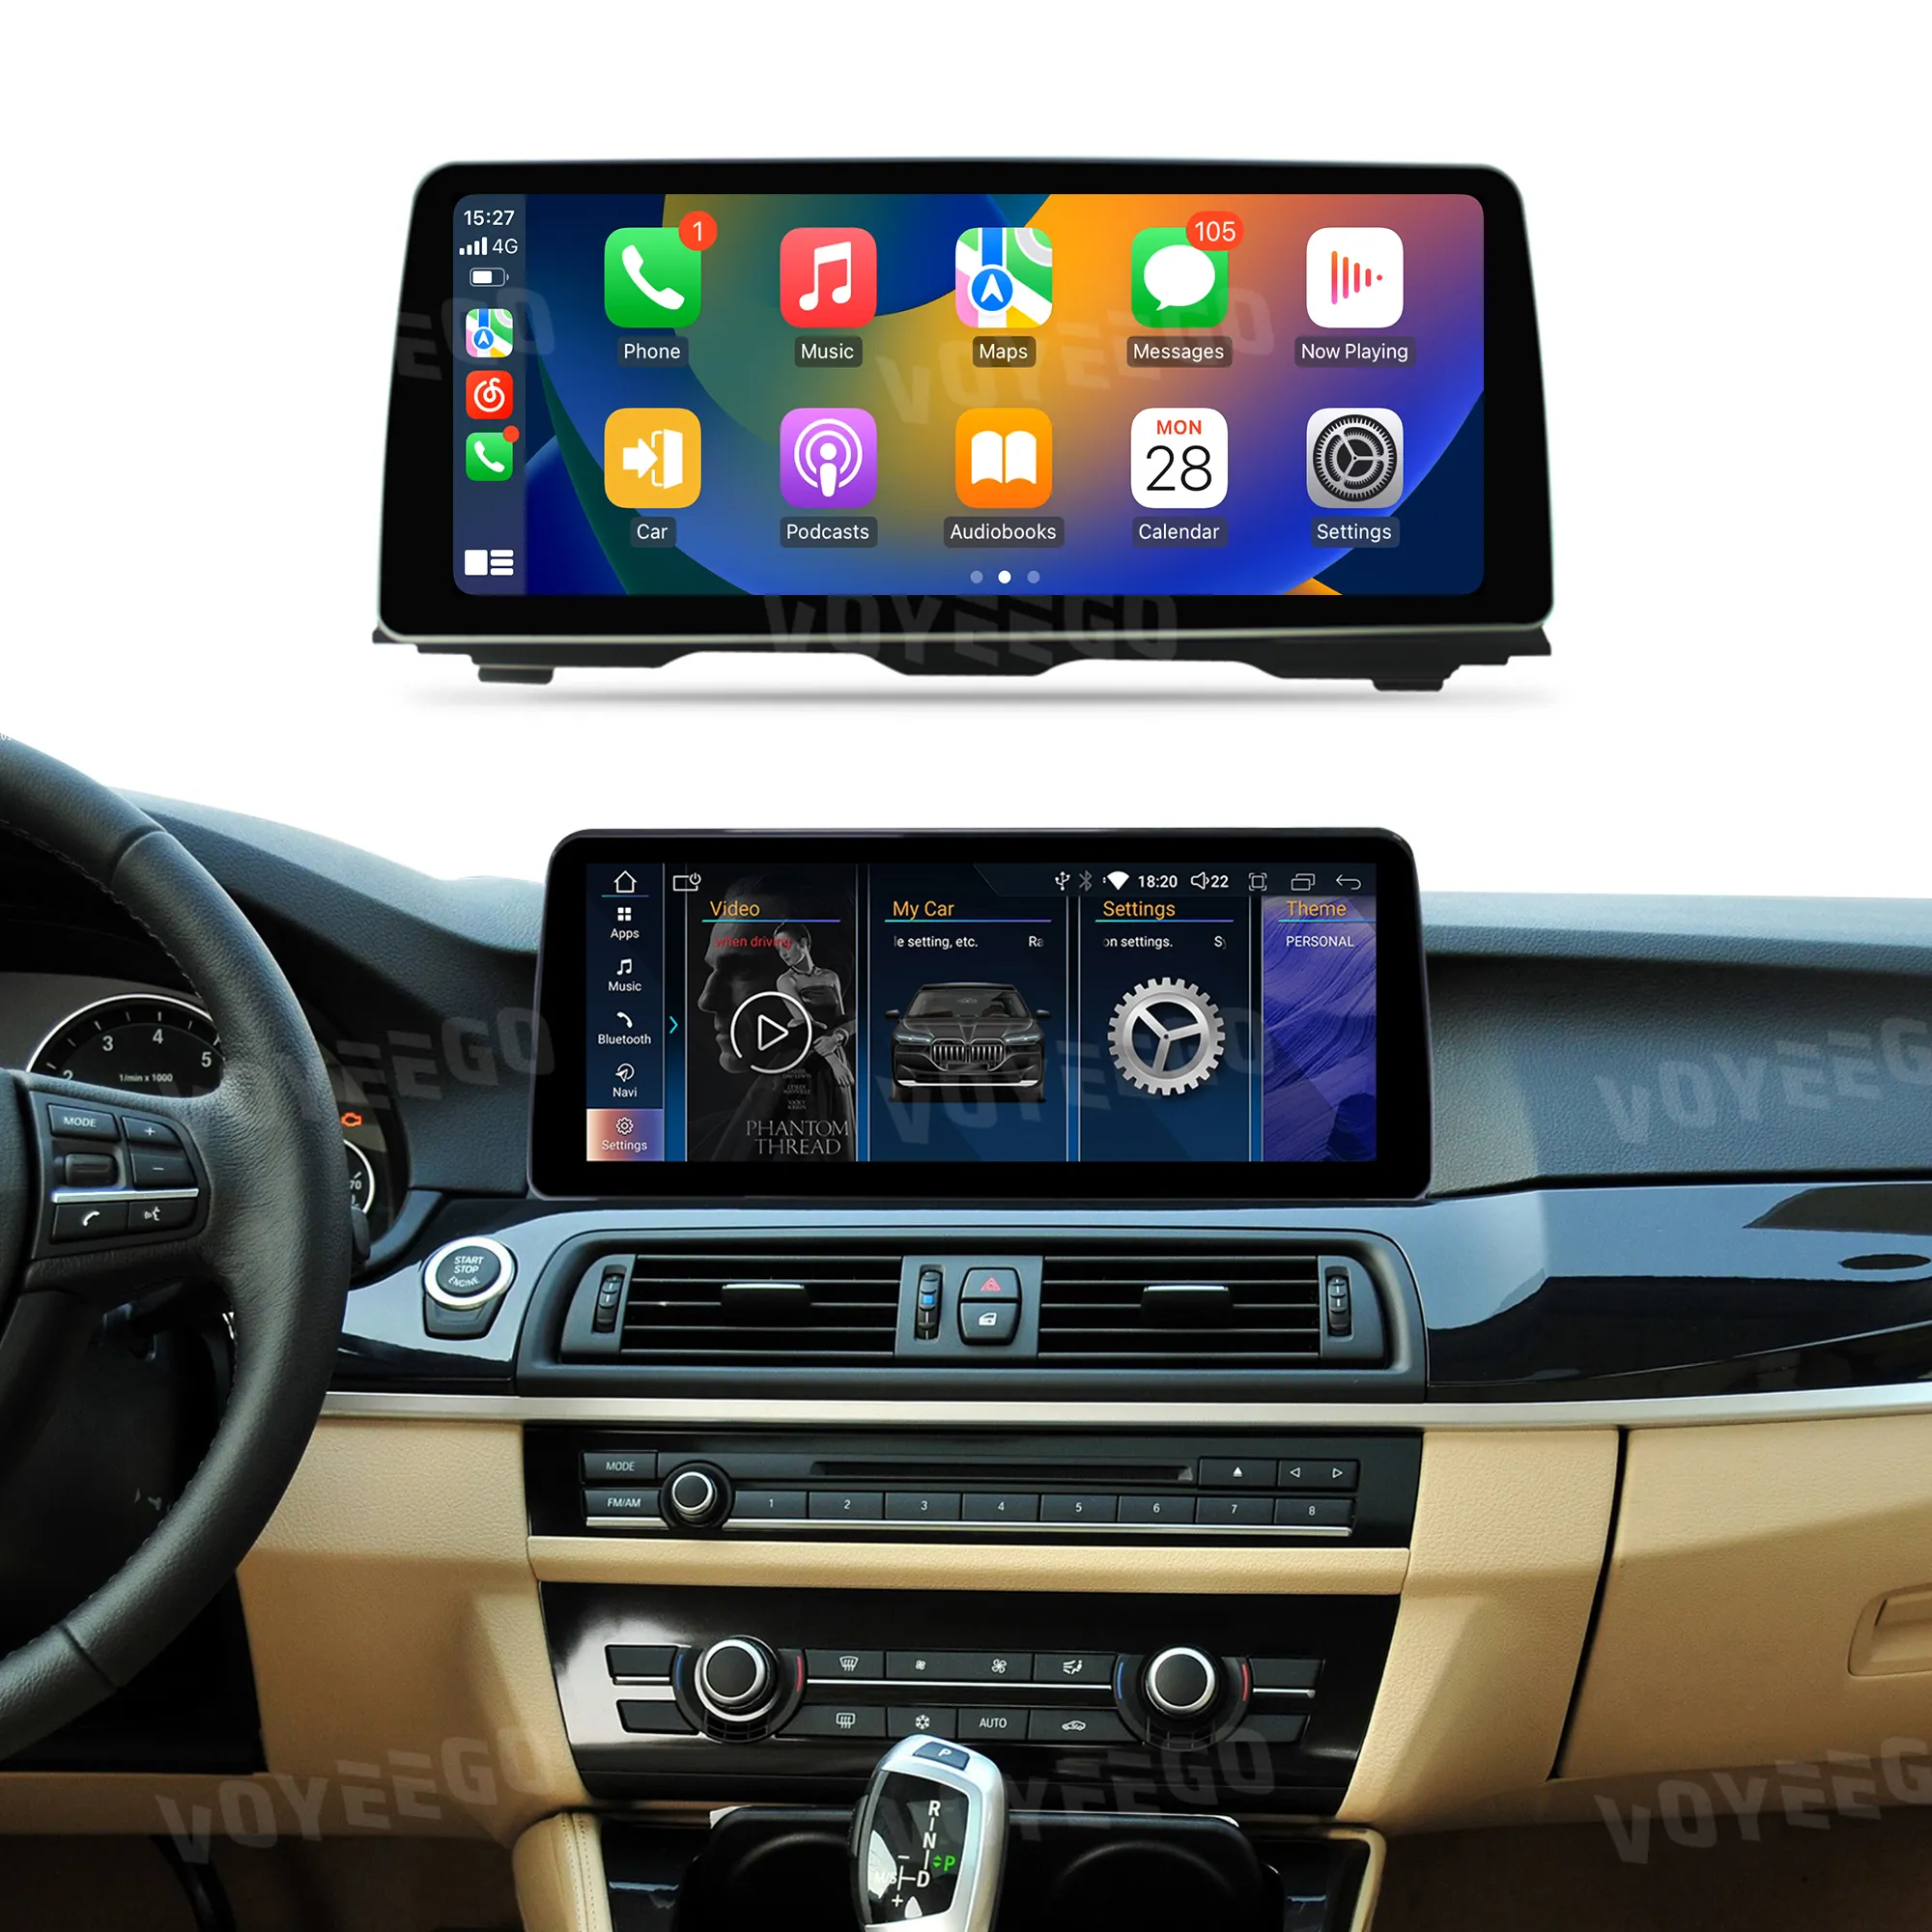 YZG 12,3 Zoll Android 13 Snapdragon 64 GB Touchscreen mit Carplay Android Auto Navigationsbildschirm für BMW 5 F10 F11 E60 F30 2015